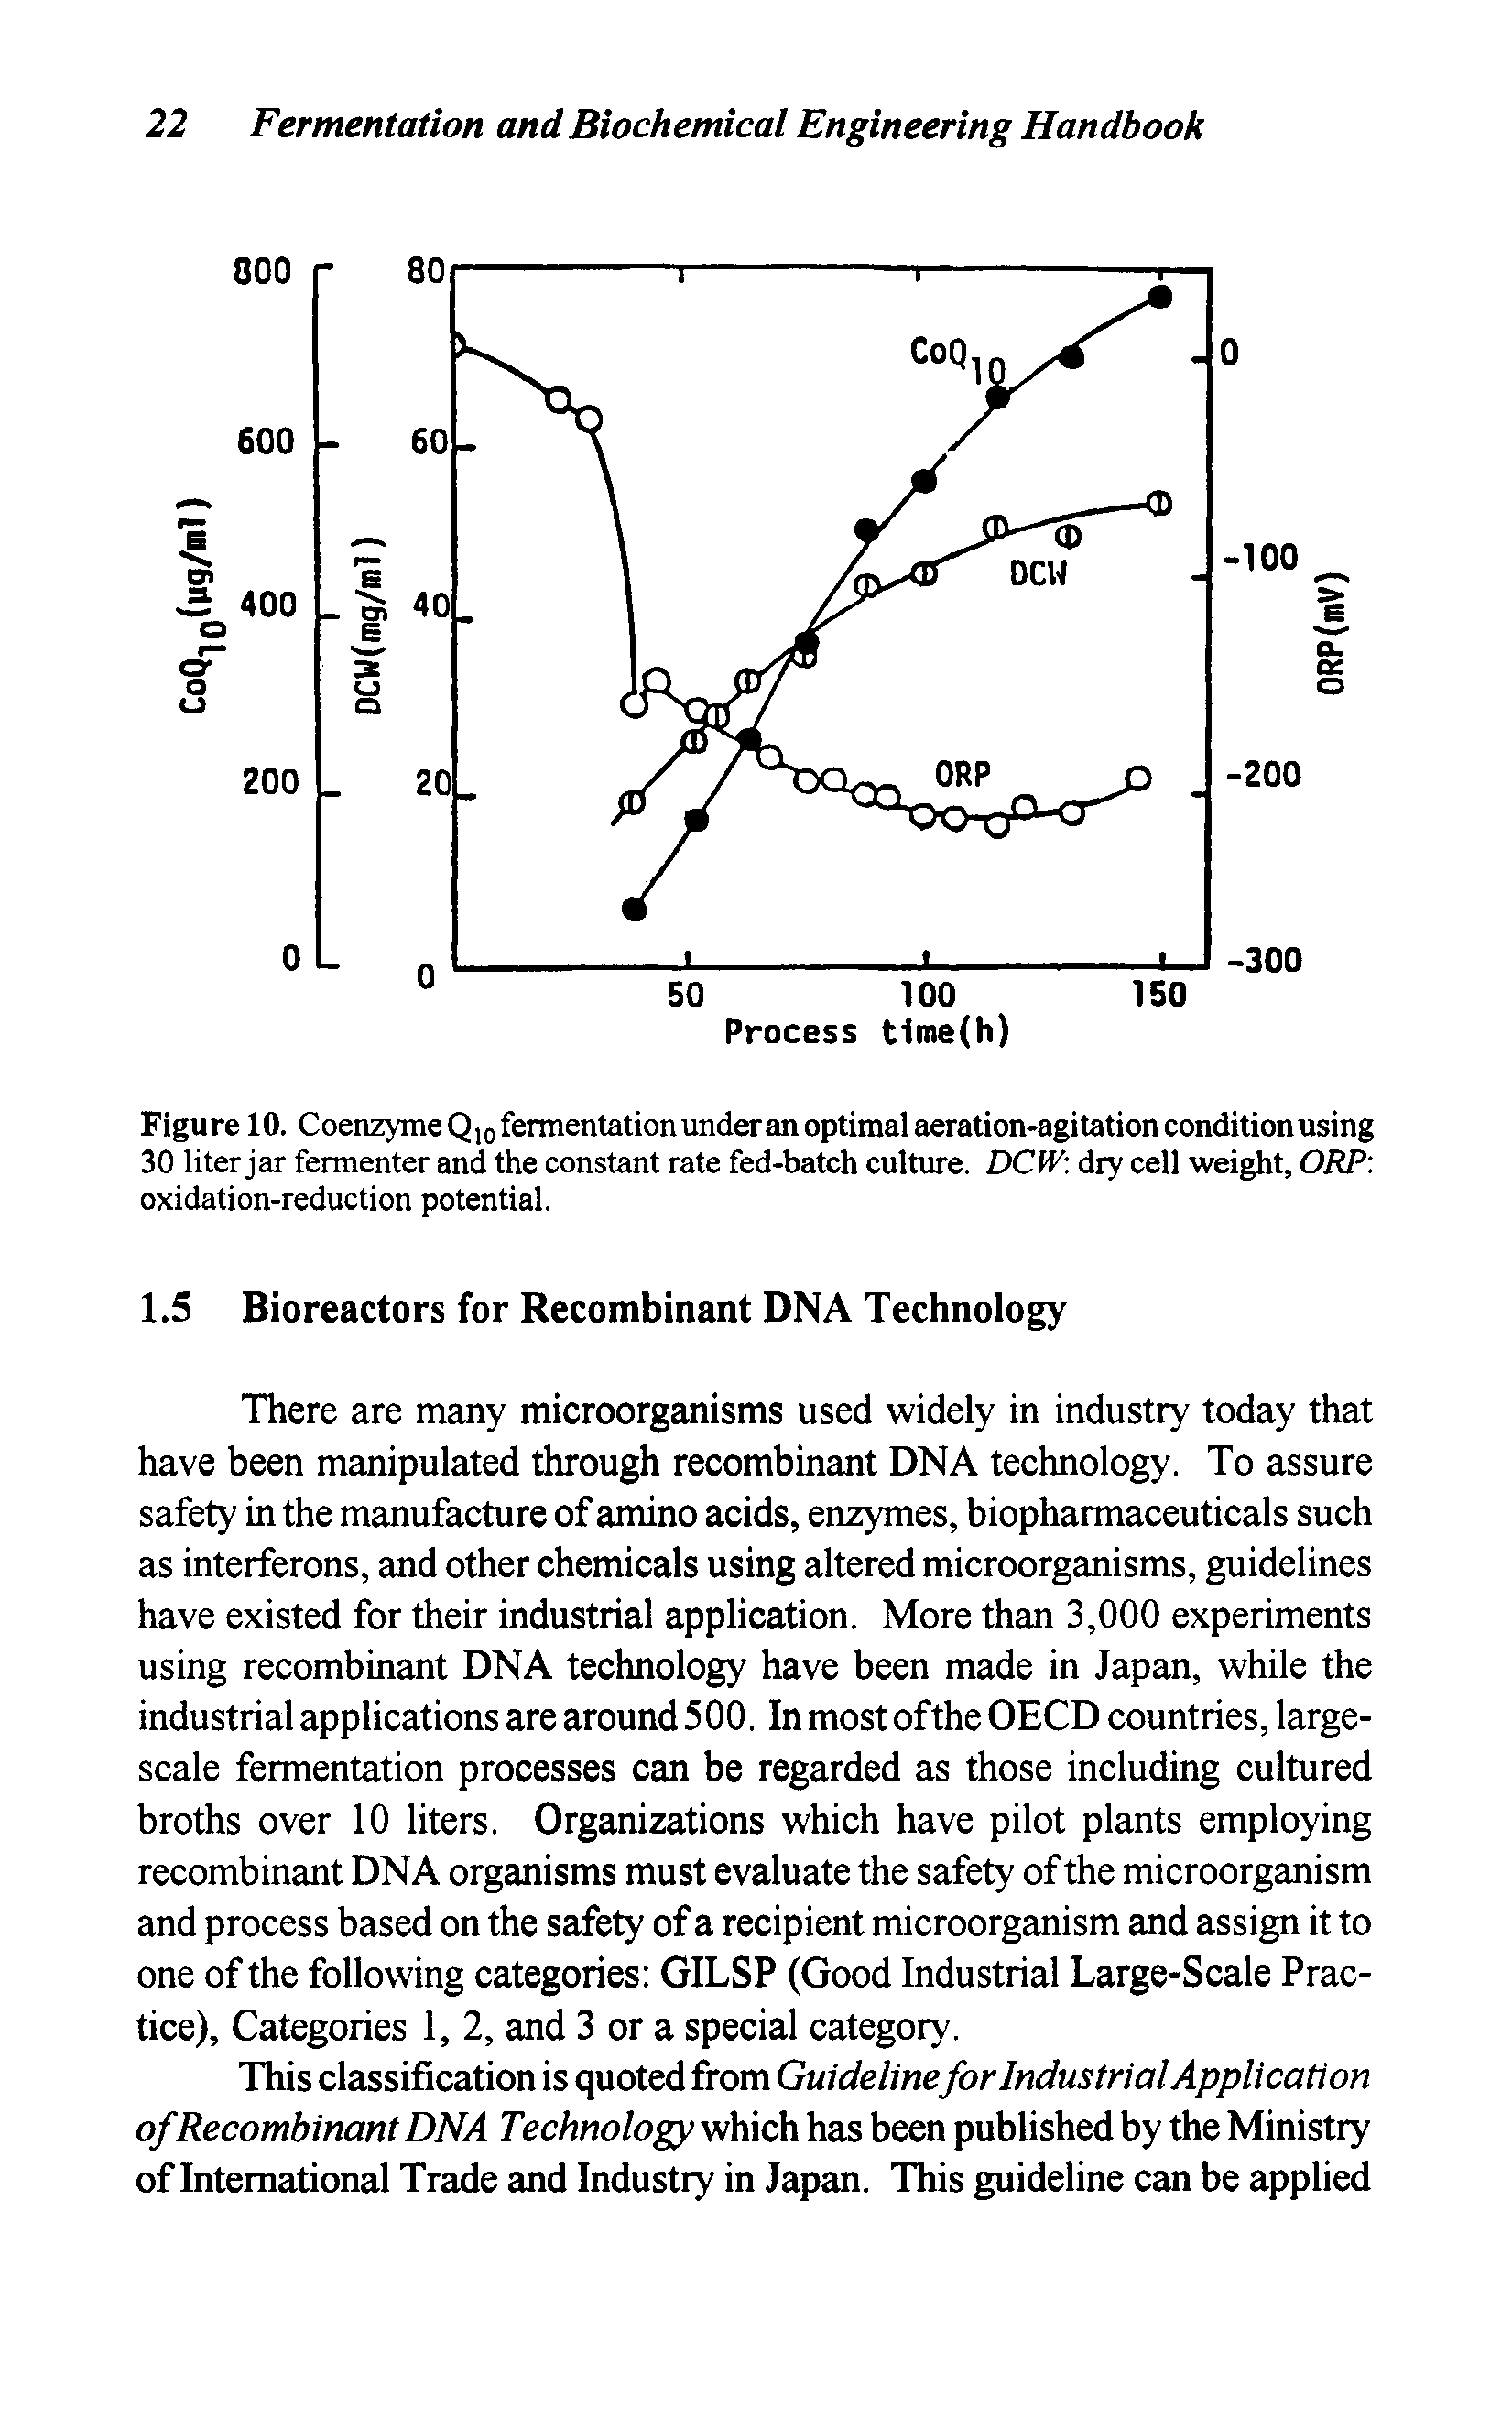 Figure 10. Coenzyme Qjq fennentation under an optimal aeration-agitation condition using 30 liter jar fermenter and the constant rate fed-batch culture. DCfV dry cell weight, ORP oxidation-reduction potential.